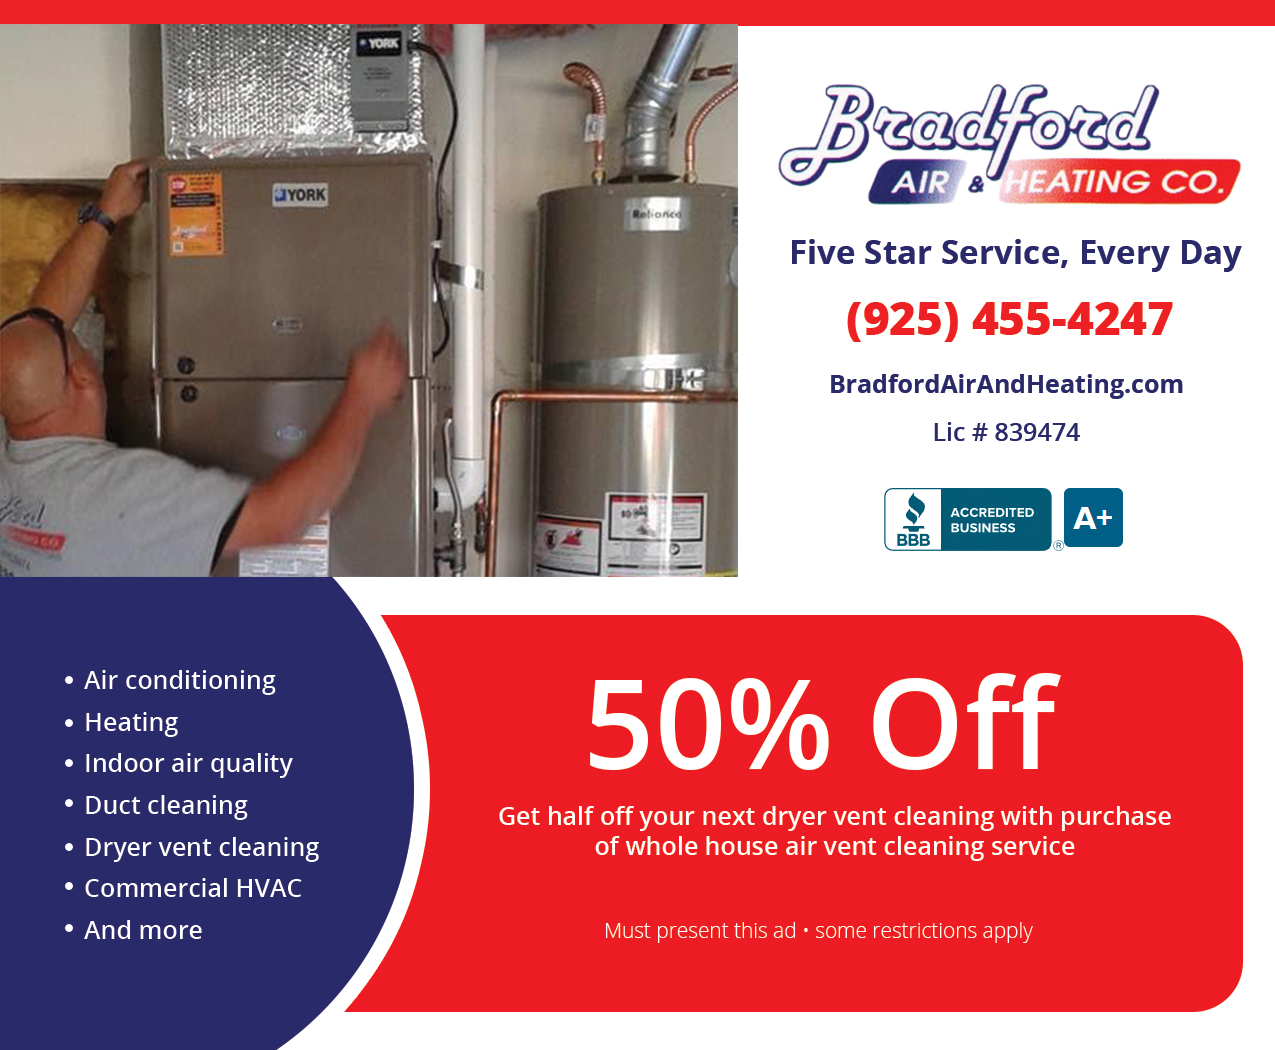 Get half off your next dryer vent cleaning with purchase of whole house air vent cleaning service